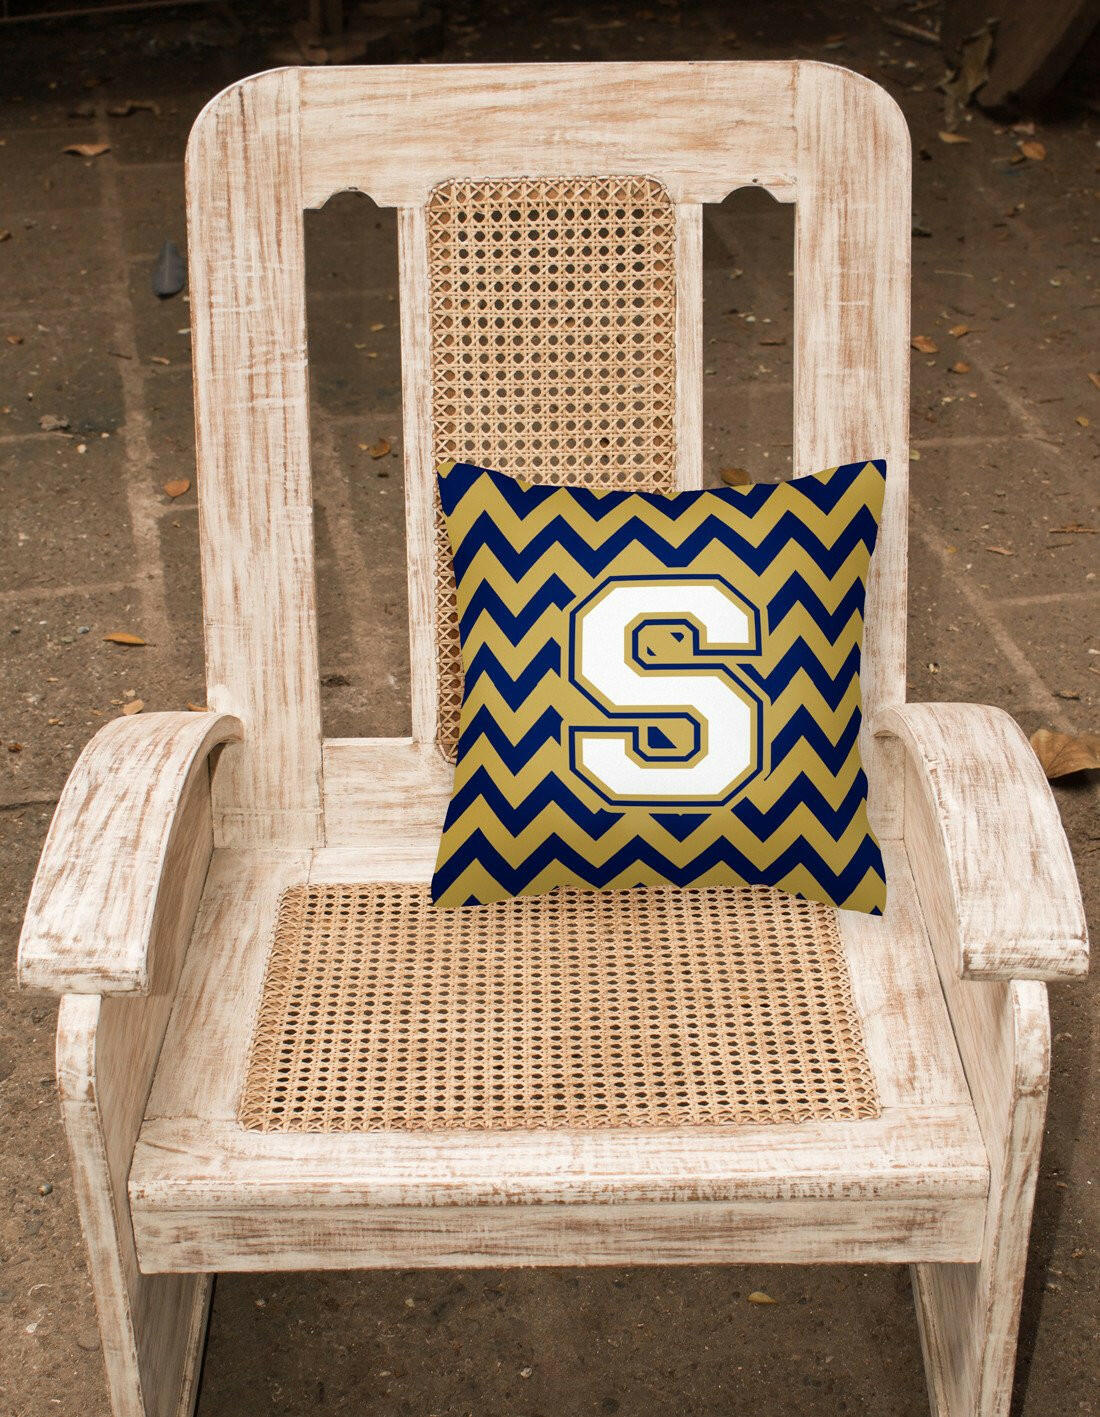 Letter S Chevron Navy Blue and Gold Fabric Decorative Pillow CJ1057-SPW1414 by Caroline's Treasures